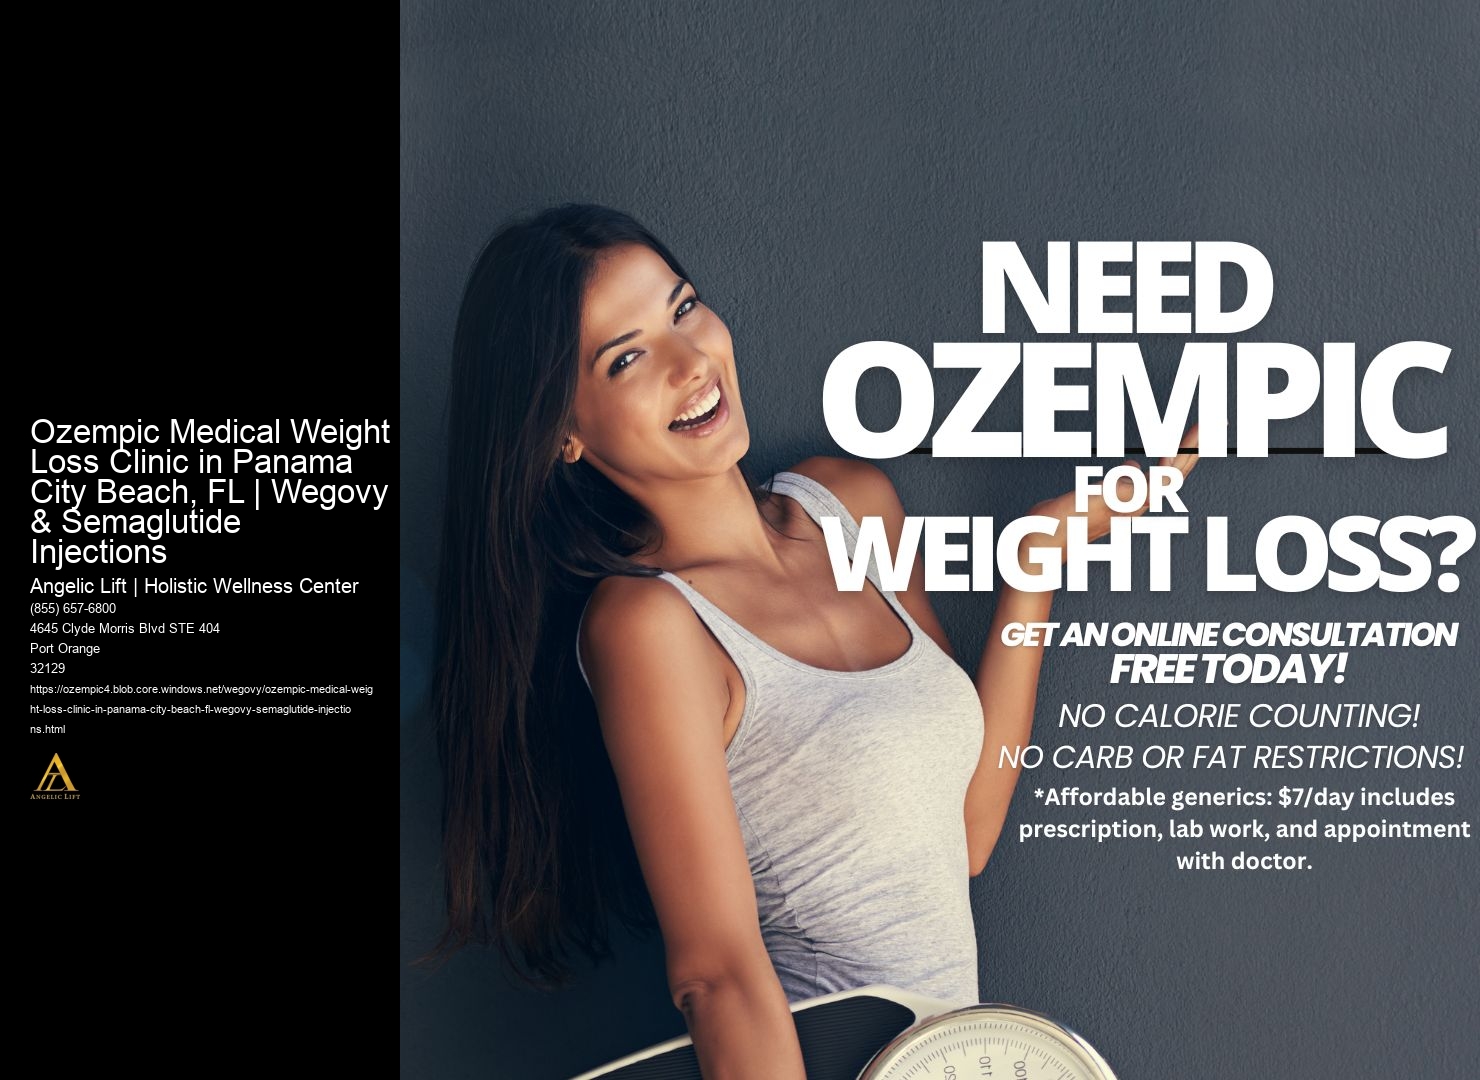 Ozempic Medical Weight Loss Clinic in Panama City Beach, FL | Wegovy & Semaglutide Injections